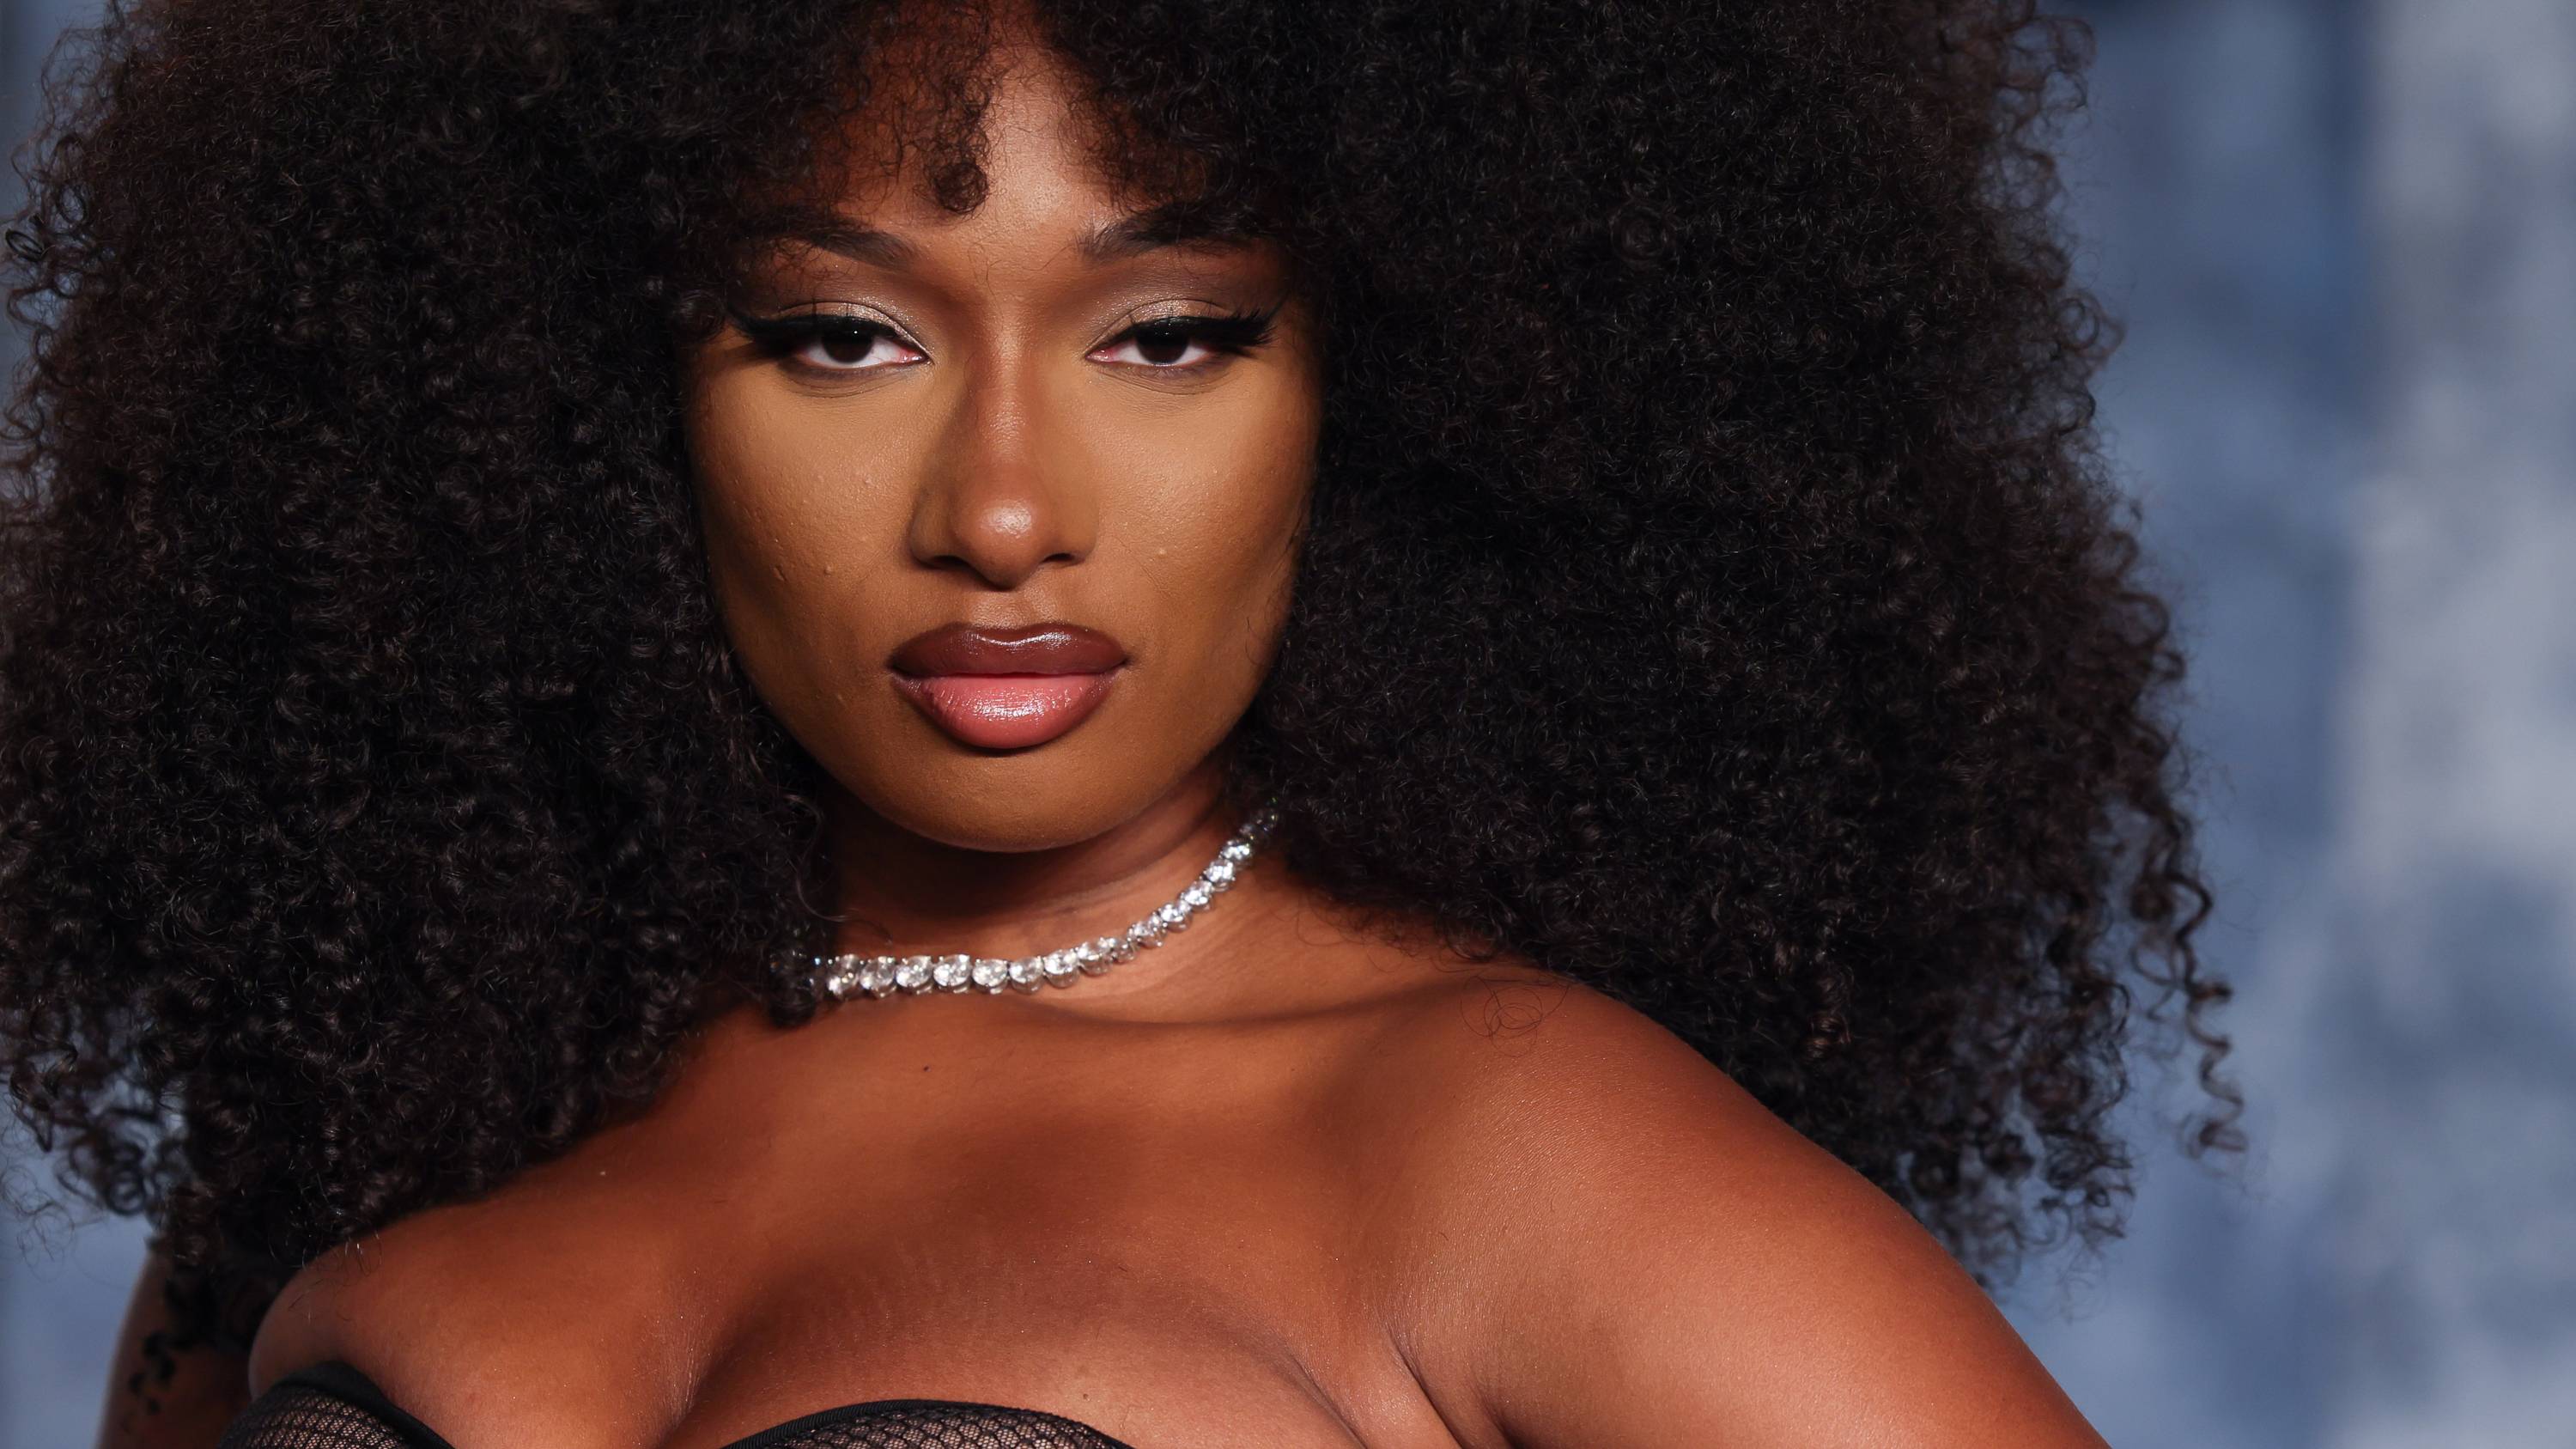 Megan Thee Stallion returns to spotlight with sensual dance in